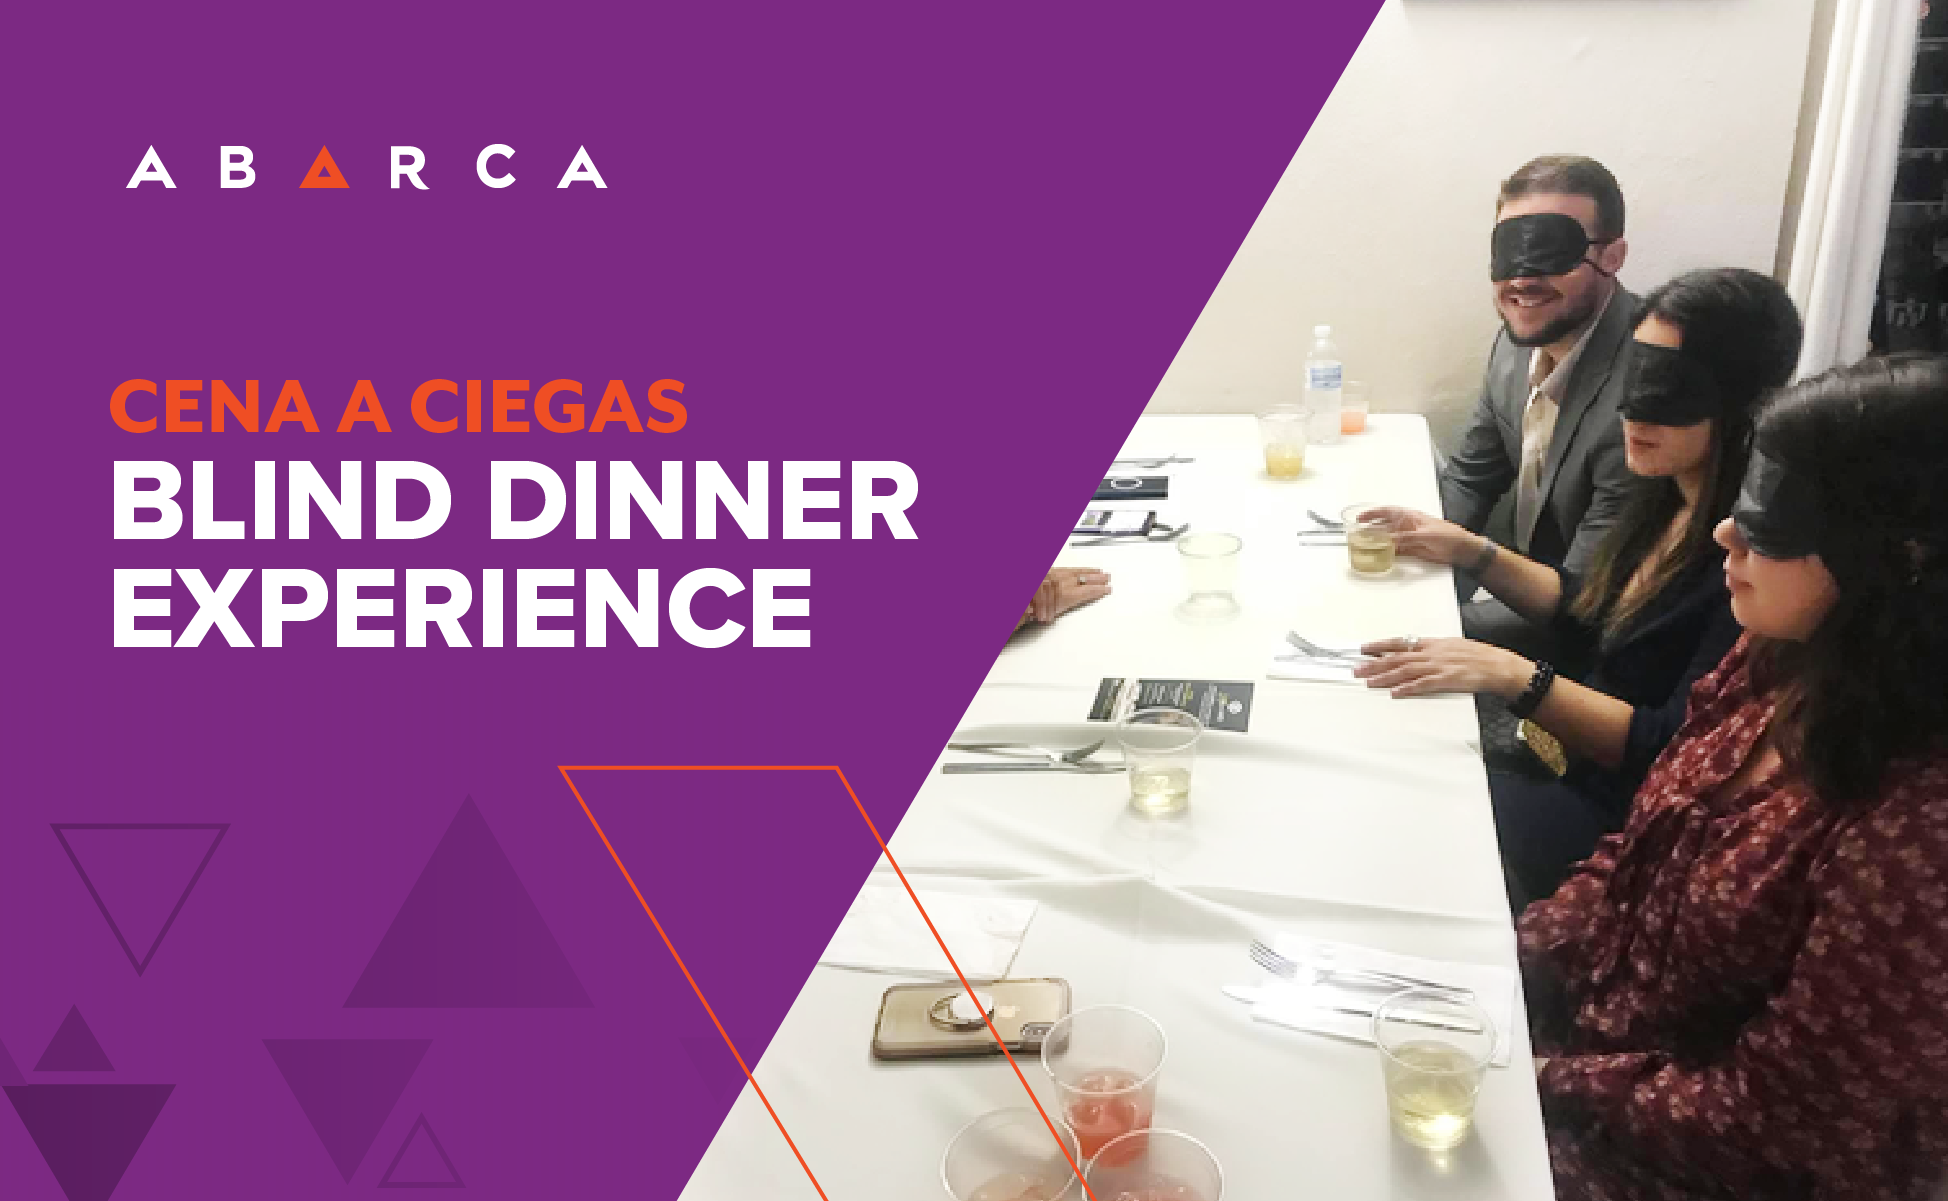 Abarcans Humbled by Cena a Ciegas Blind Dinner Experience